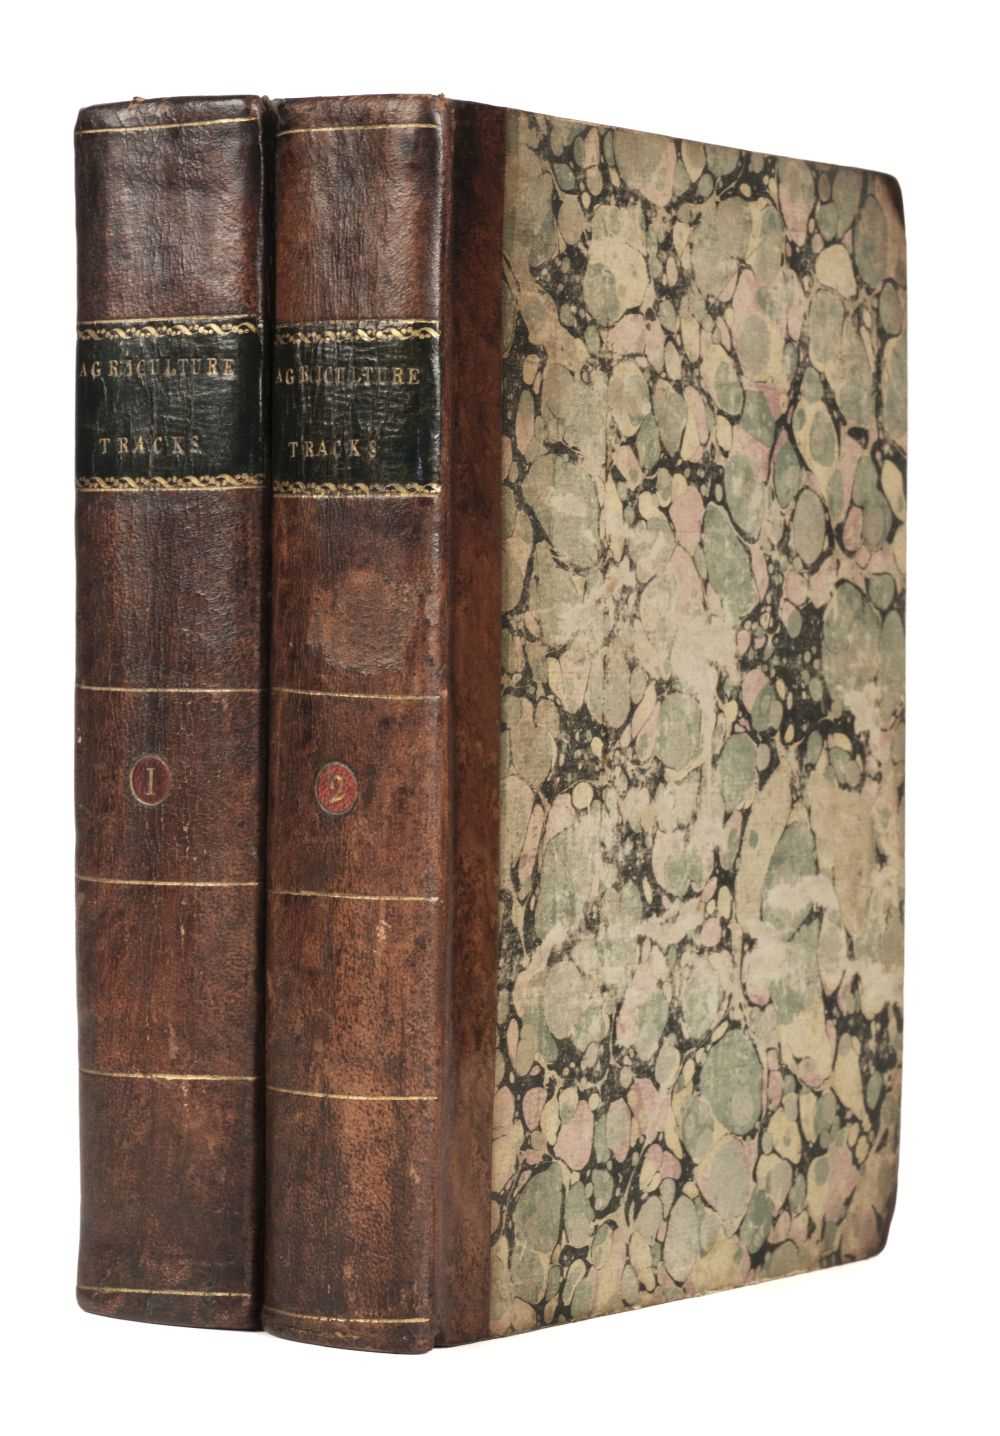 Lot 96 - Board of Agriculture; Scotland. Two volumes of agricultural reports, 1793-5